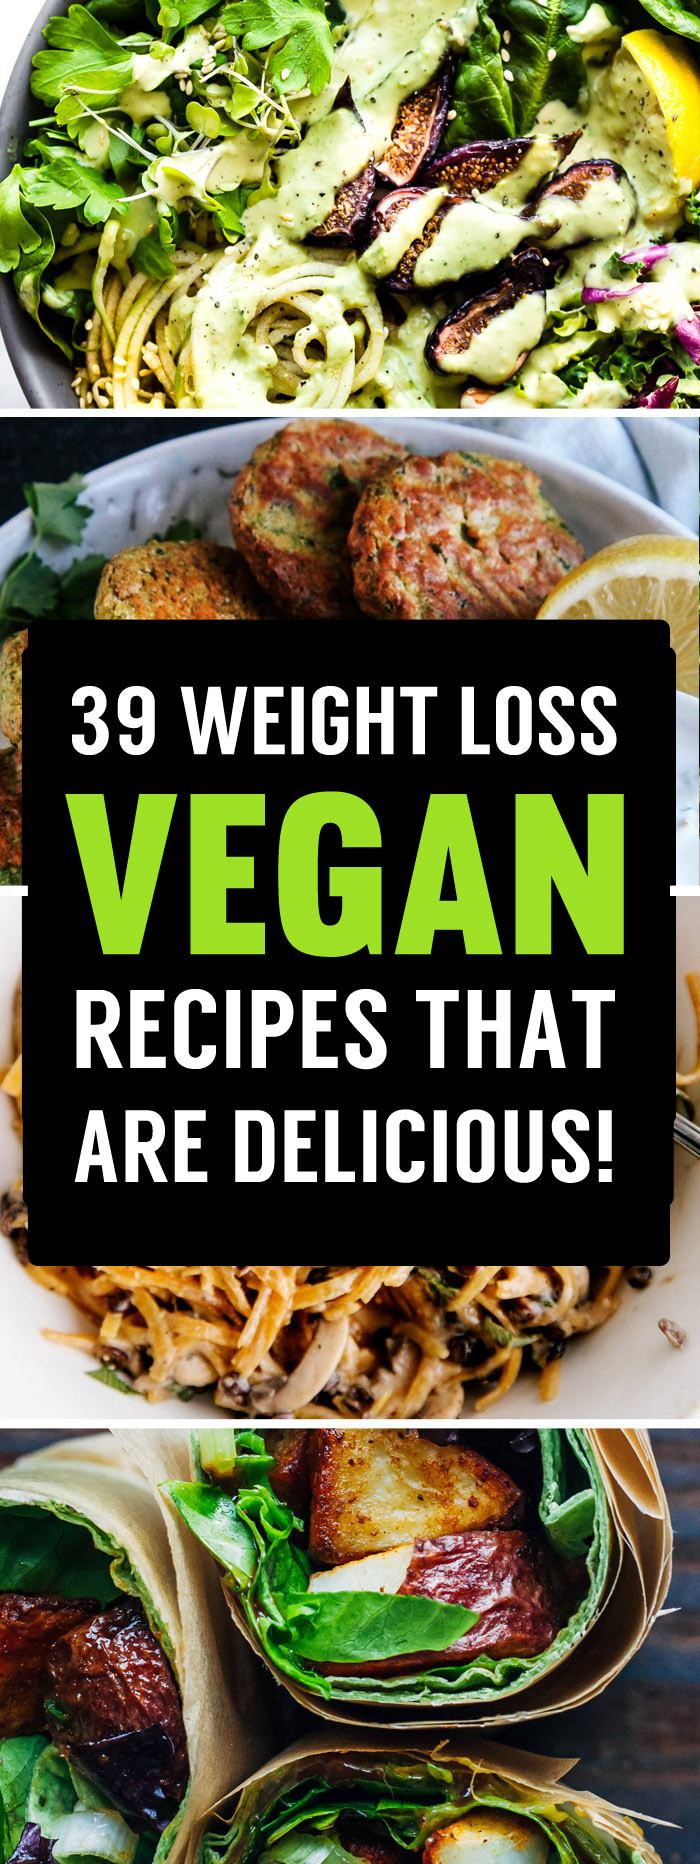 Weight Loss Vegan Recipes
 39 Delicious Vegan Recipes That Are Perfect For Losing